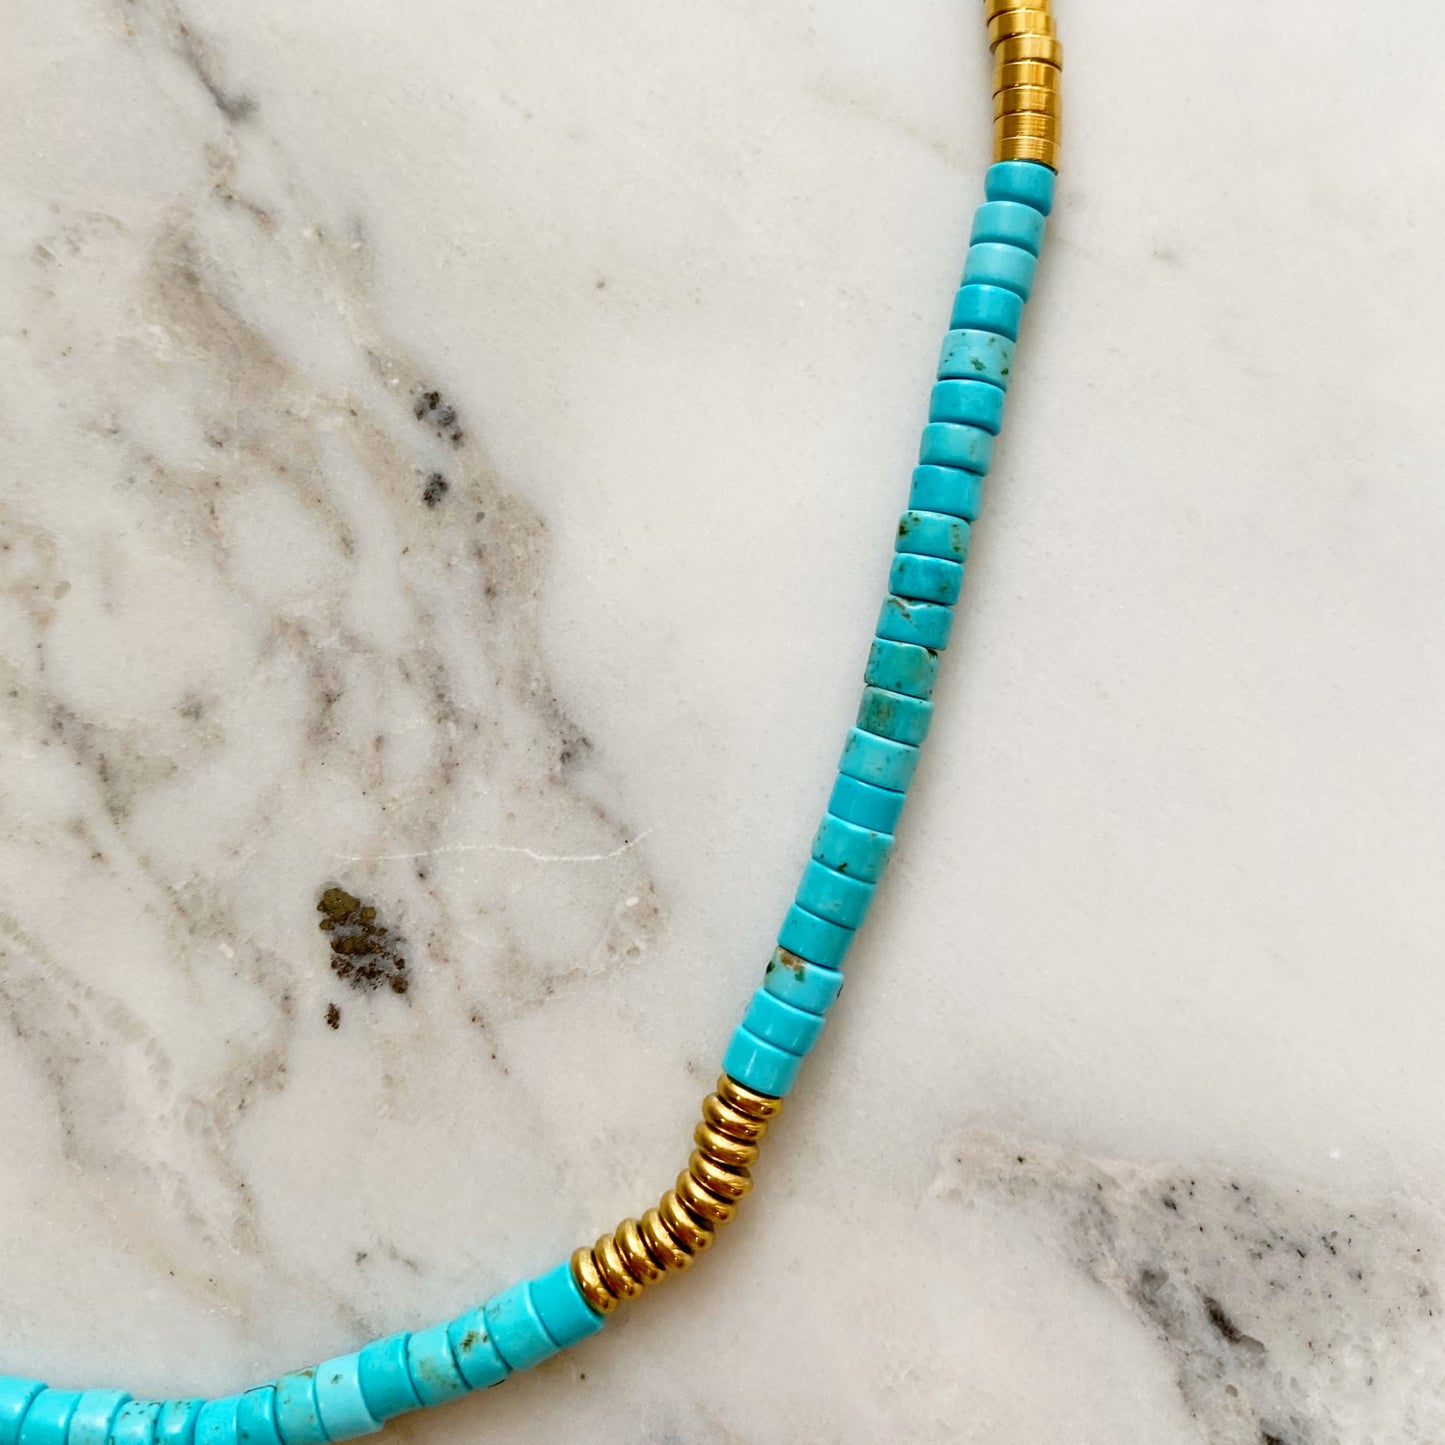 Turquoise with Gold Accents (15" to 18" length)